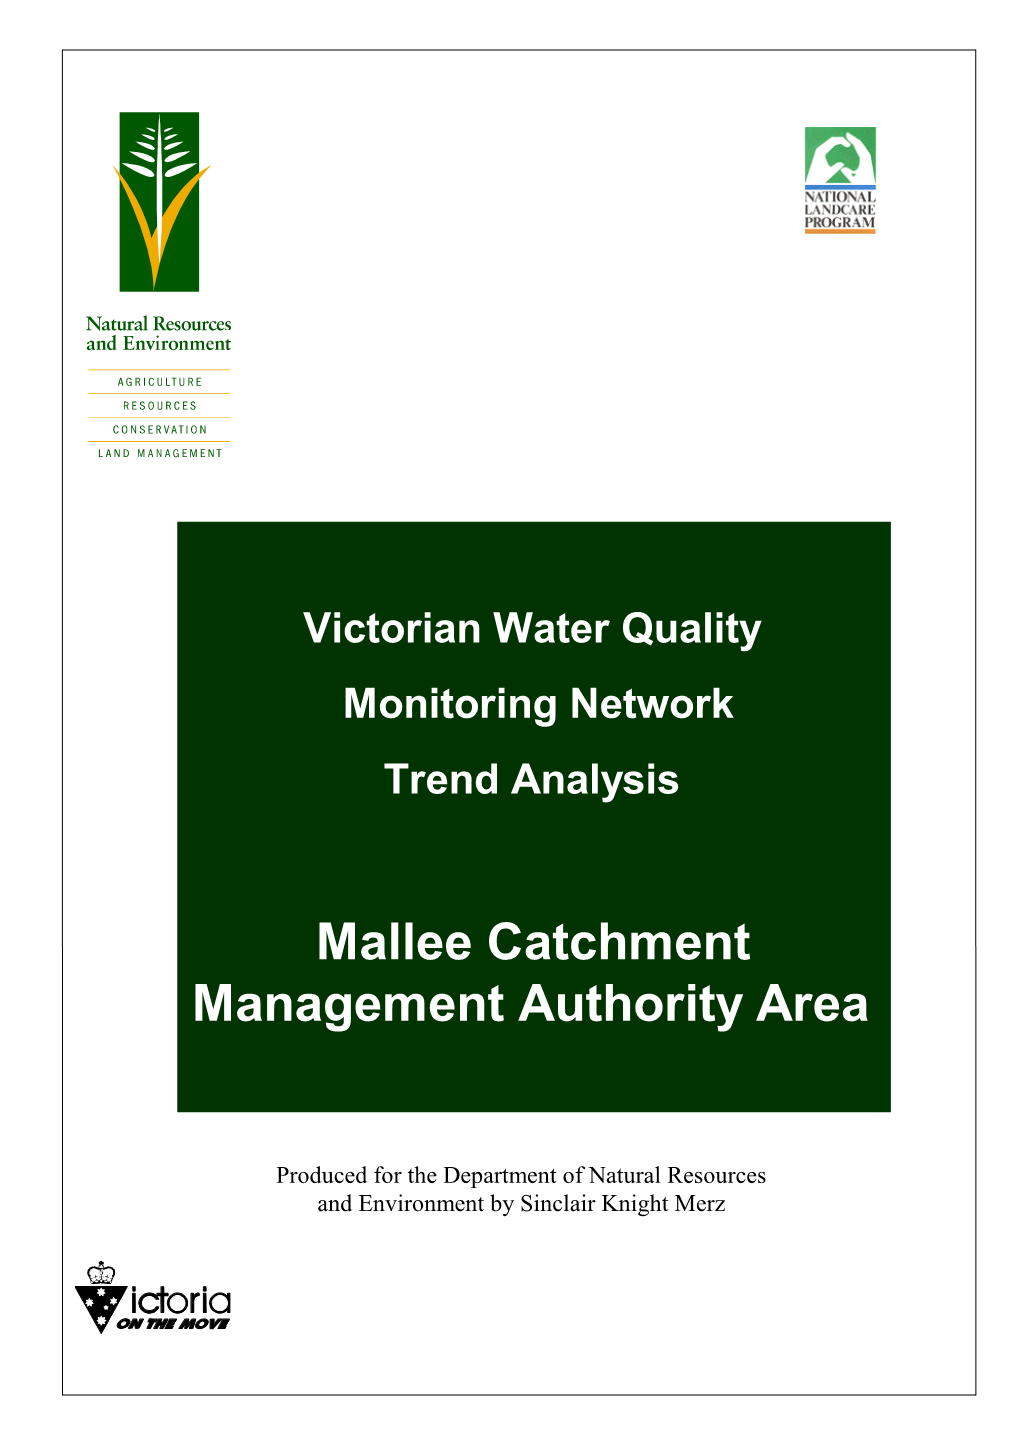 Mallee Catchment Management Authority Area